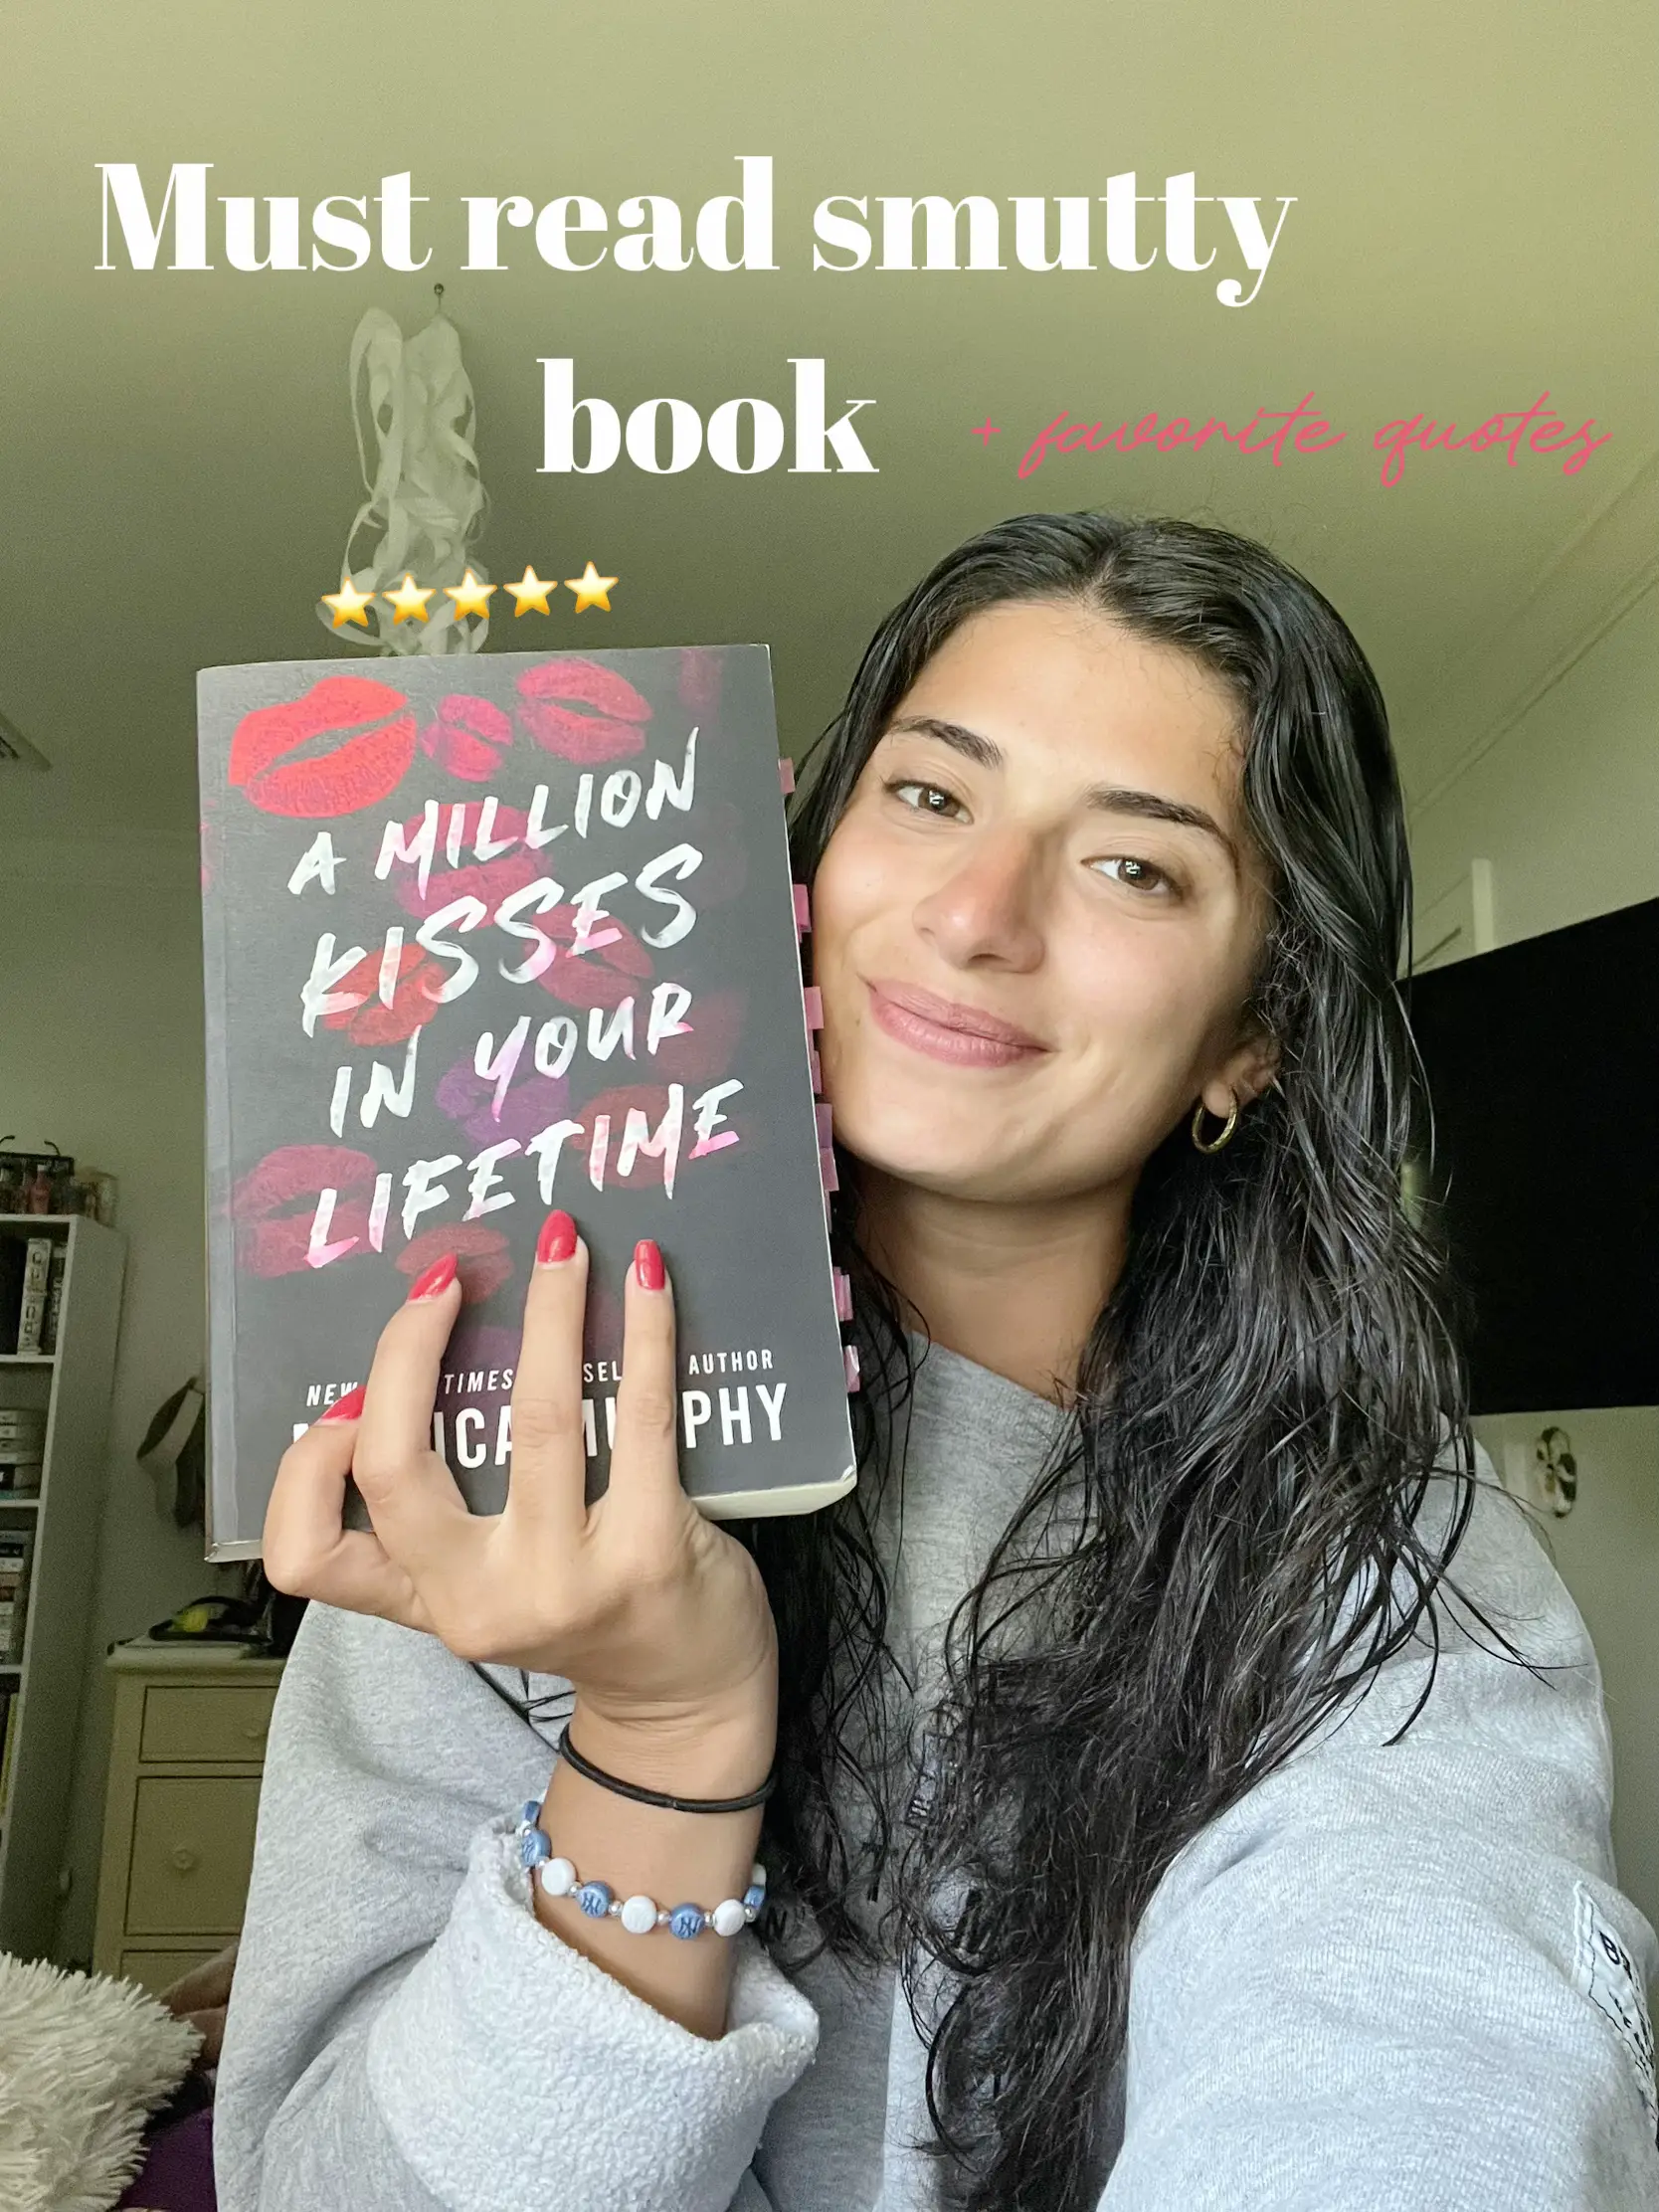  A woman is holding a book titled "A million kisses" in her hand.